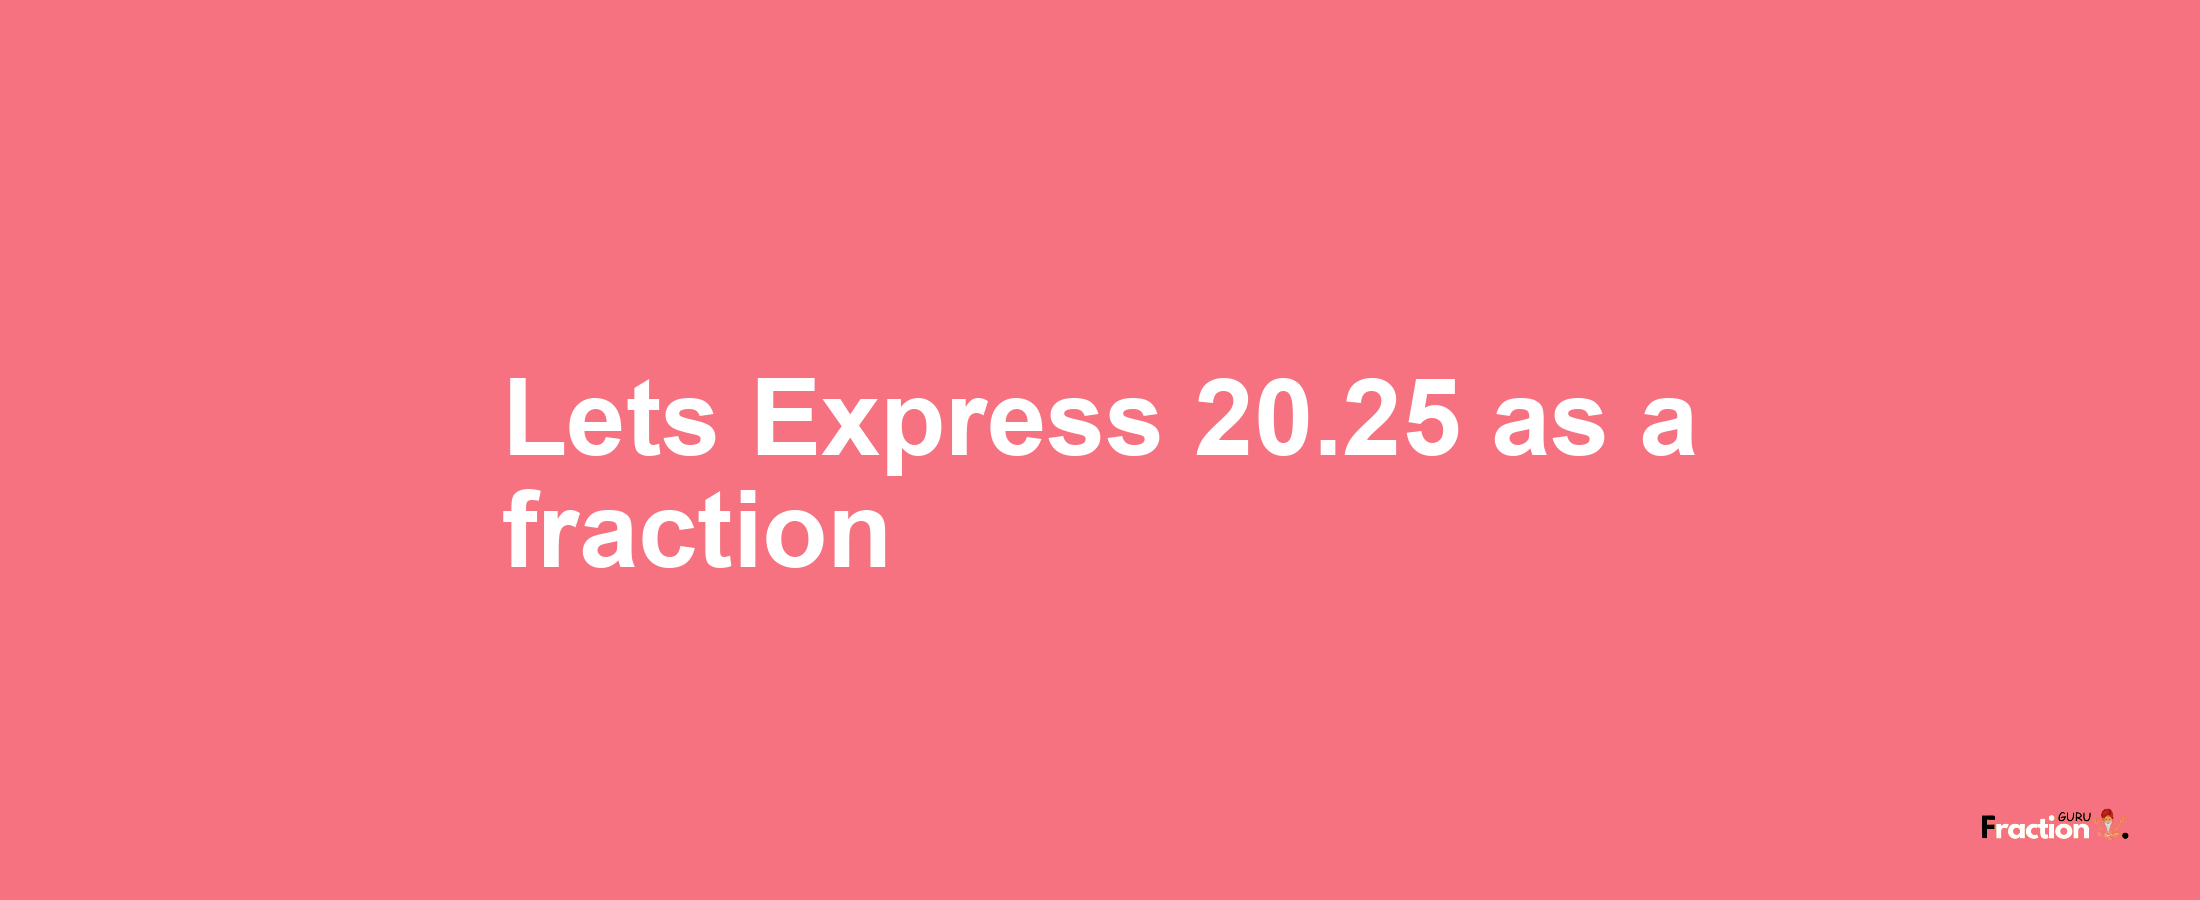 Lets Express 20.25 as afraction